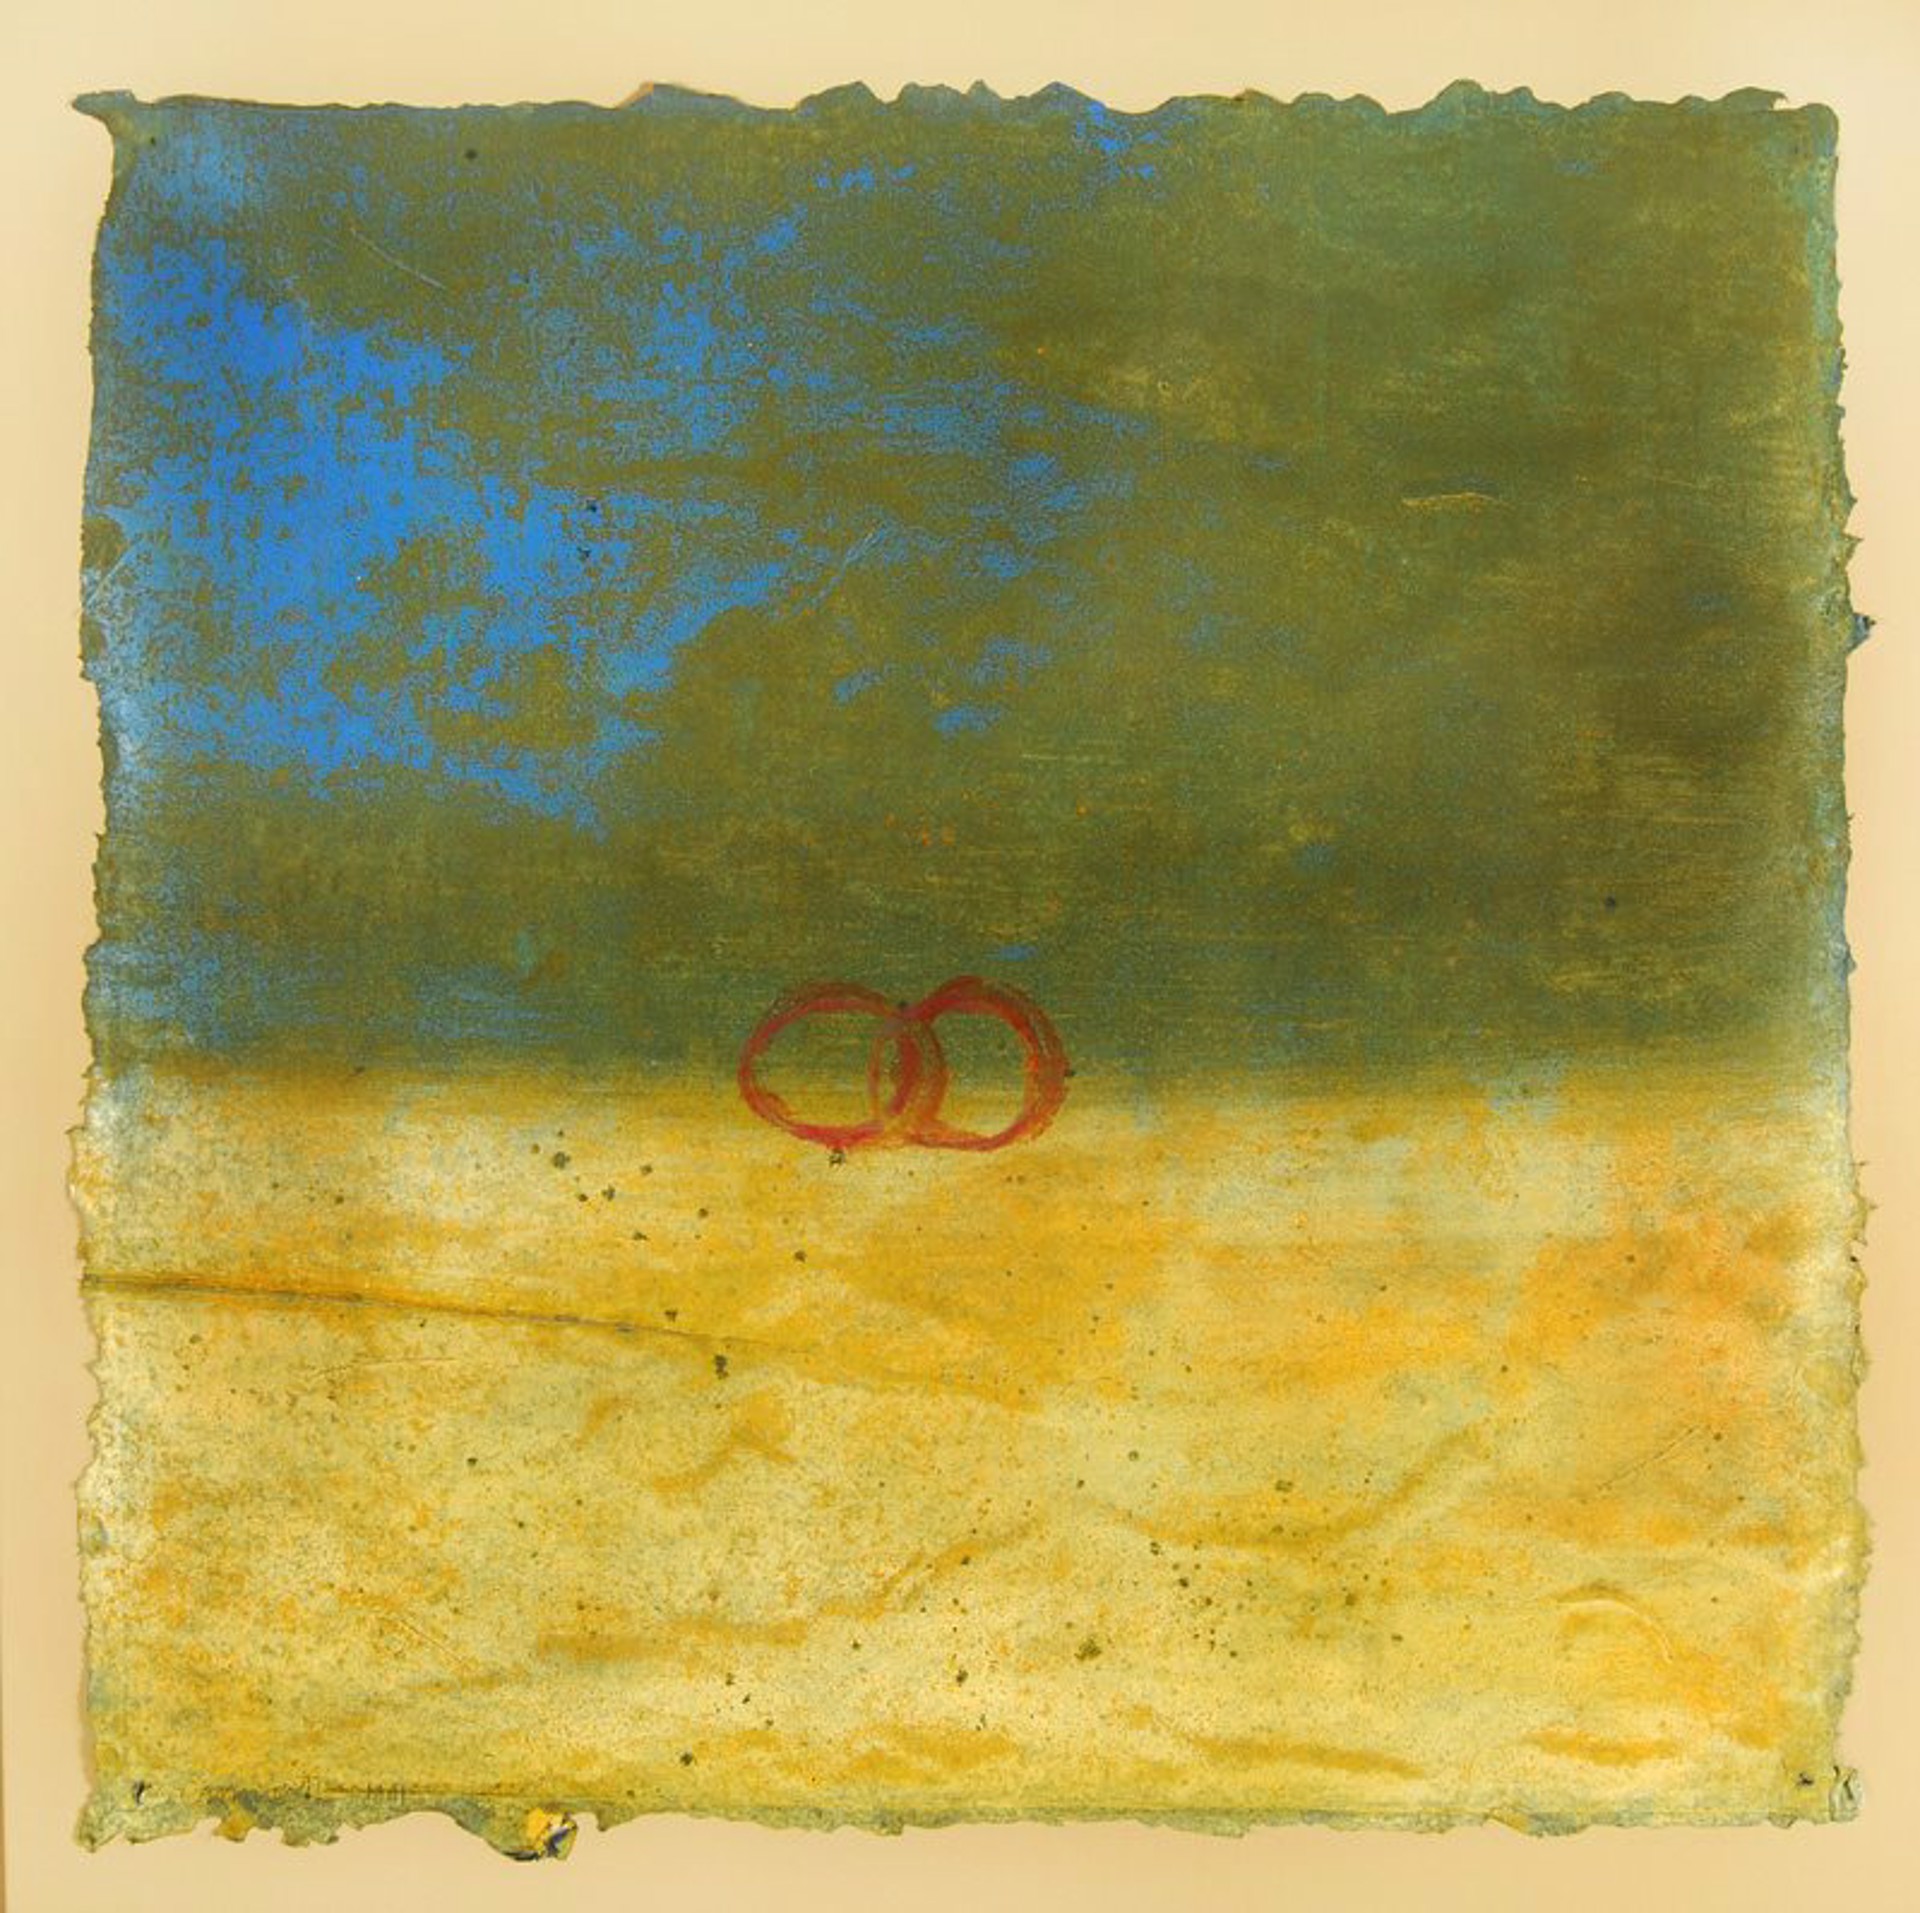 Untitled (Double Loop) by Squeak Carnwath